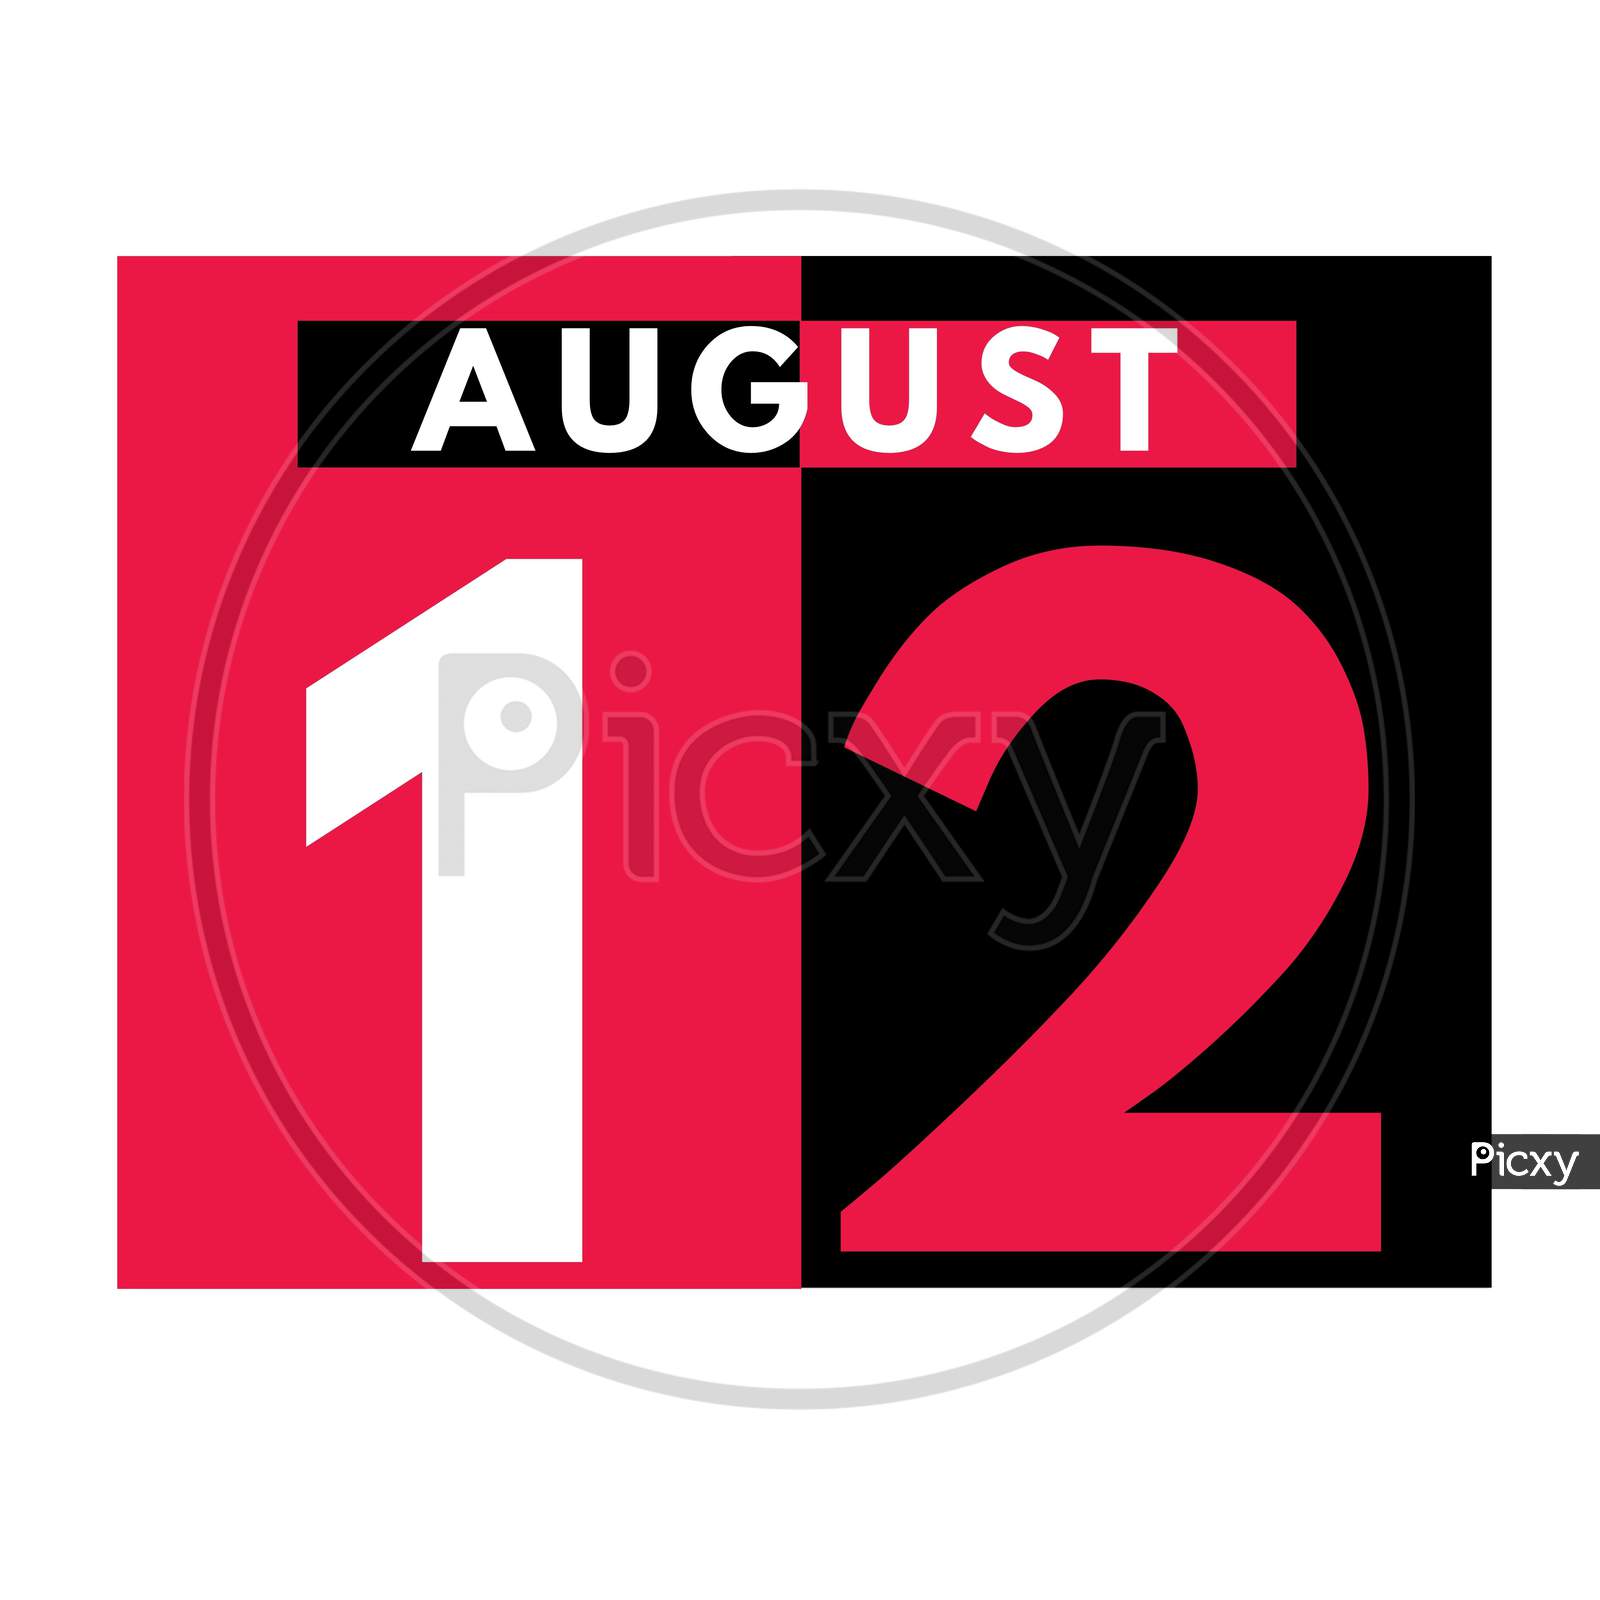 August 12 . Modern Daily Calendar Icon .Date ,Day, Month .Calendar For The Month Of August